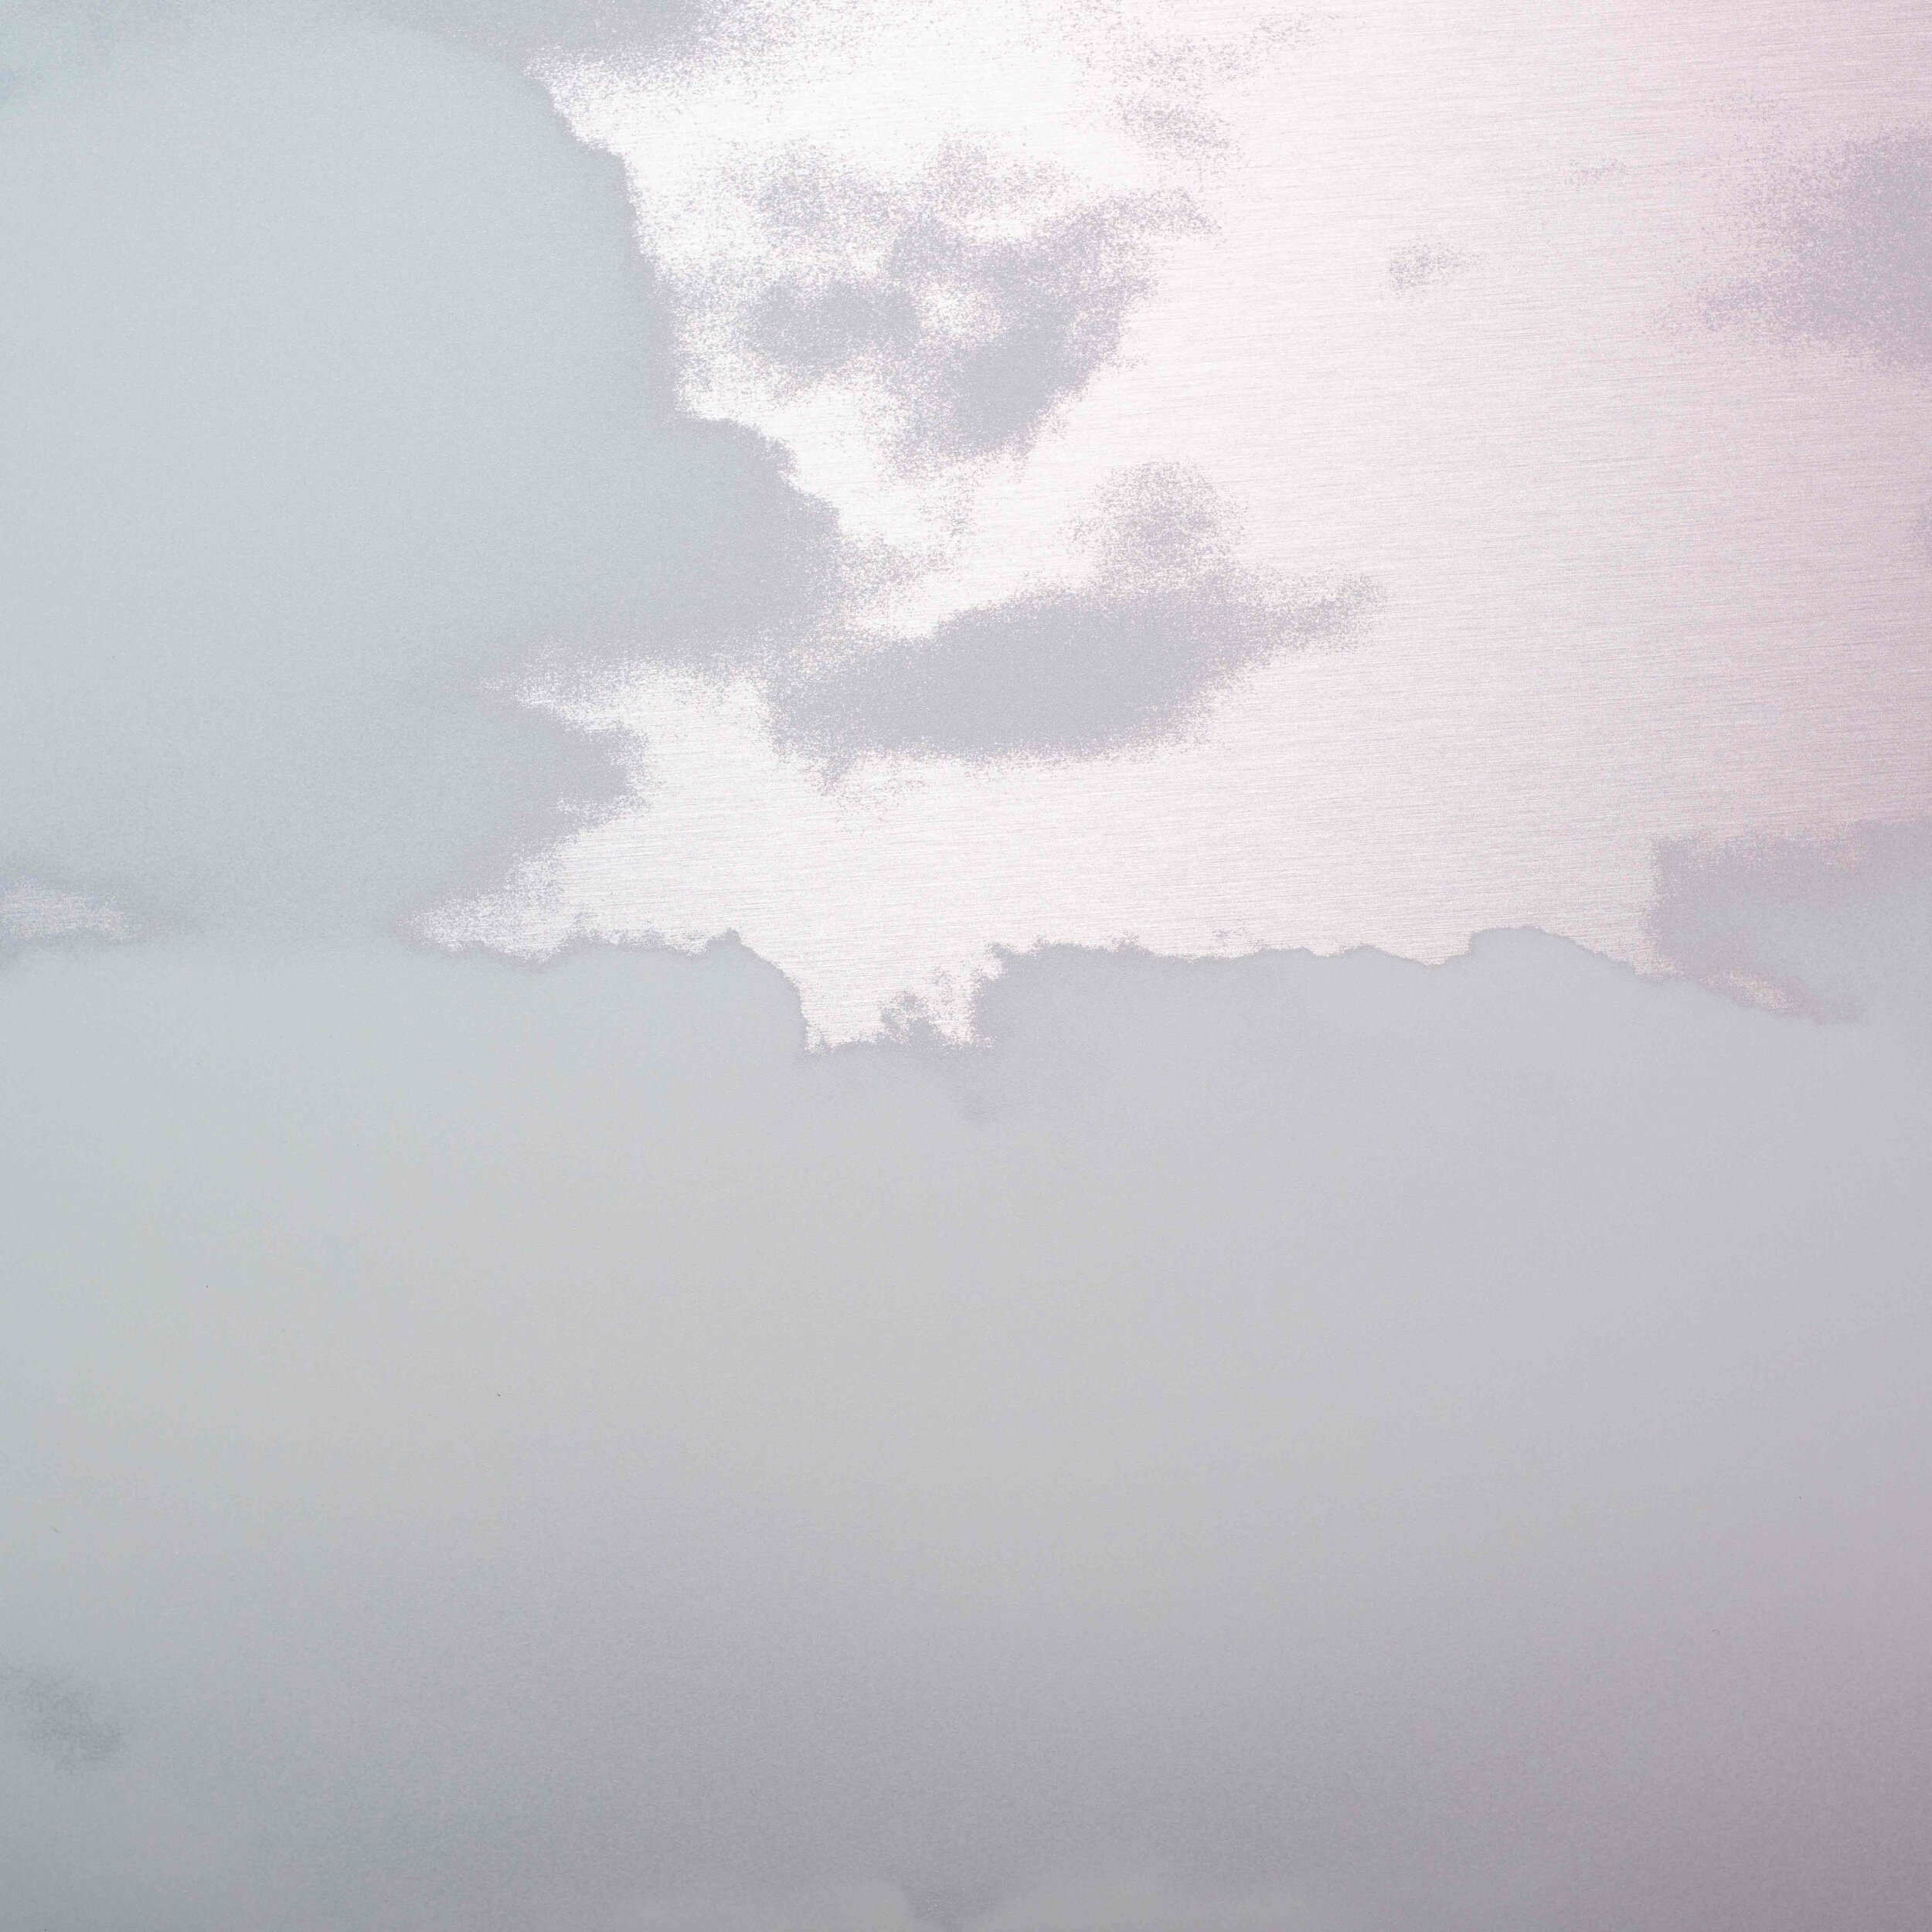 UNKAI (SEA OF CLOUDS) MAY 22 2021 5-47 AM NYC, 2021 Ink On Aluminum Composite 48 x 1 in (121.92 x 2.54 cm) Miya Ando 7.jpg